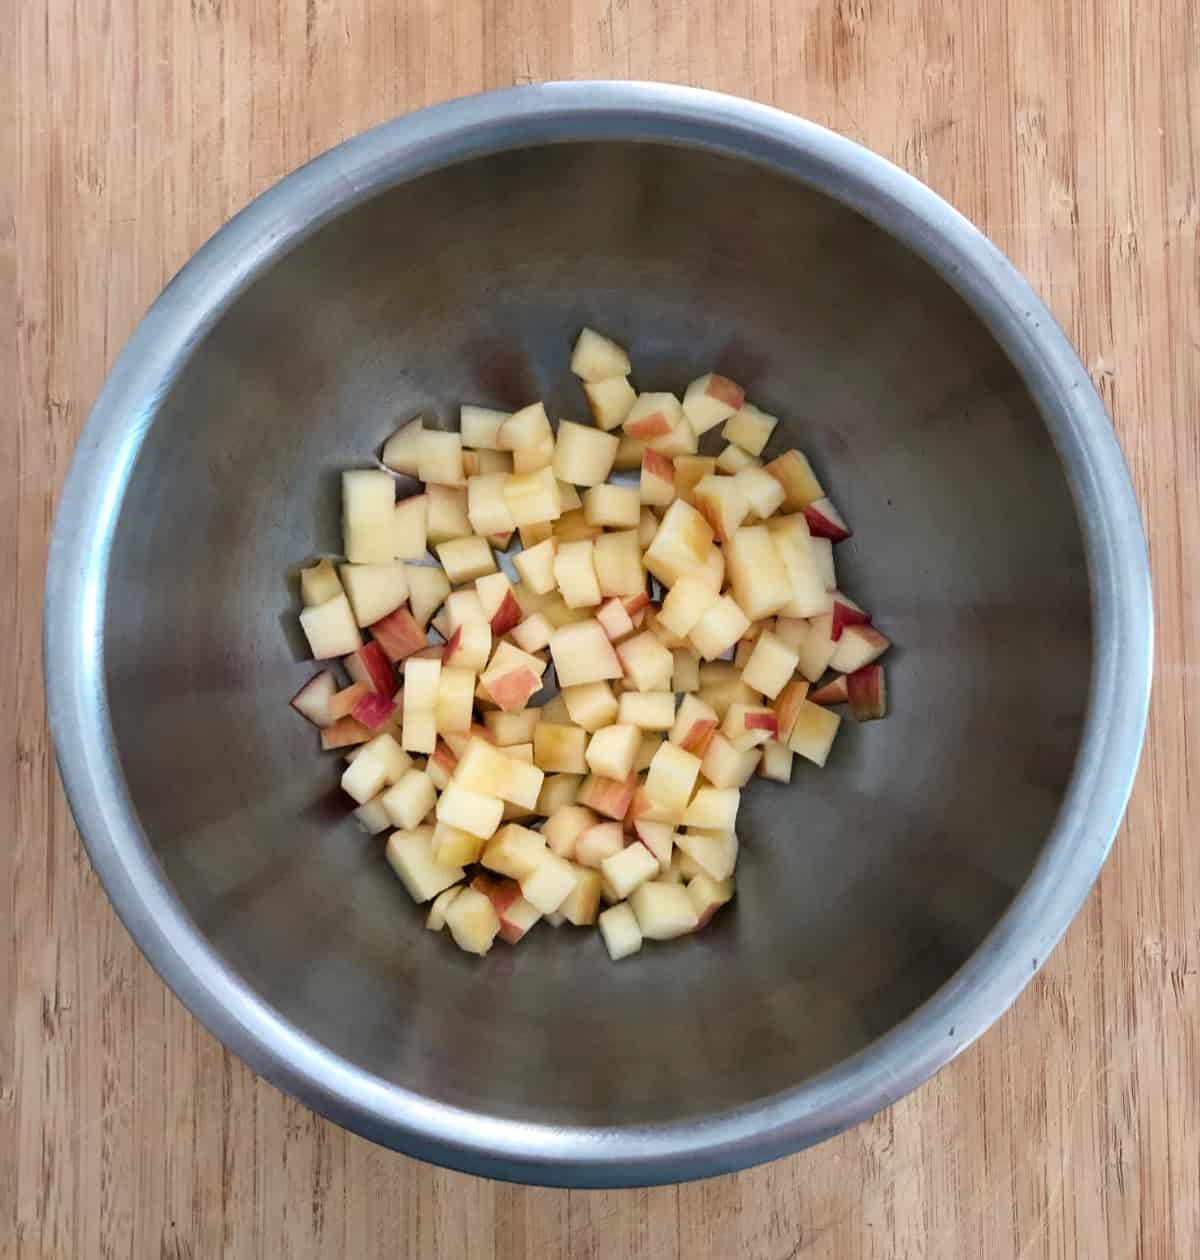 Diced apple tossed with lime juice in stainless mixing bowl on bamboo cutting board.